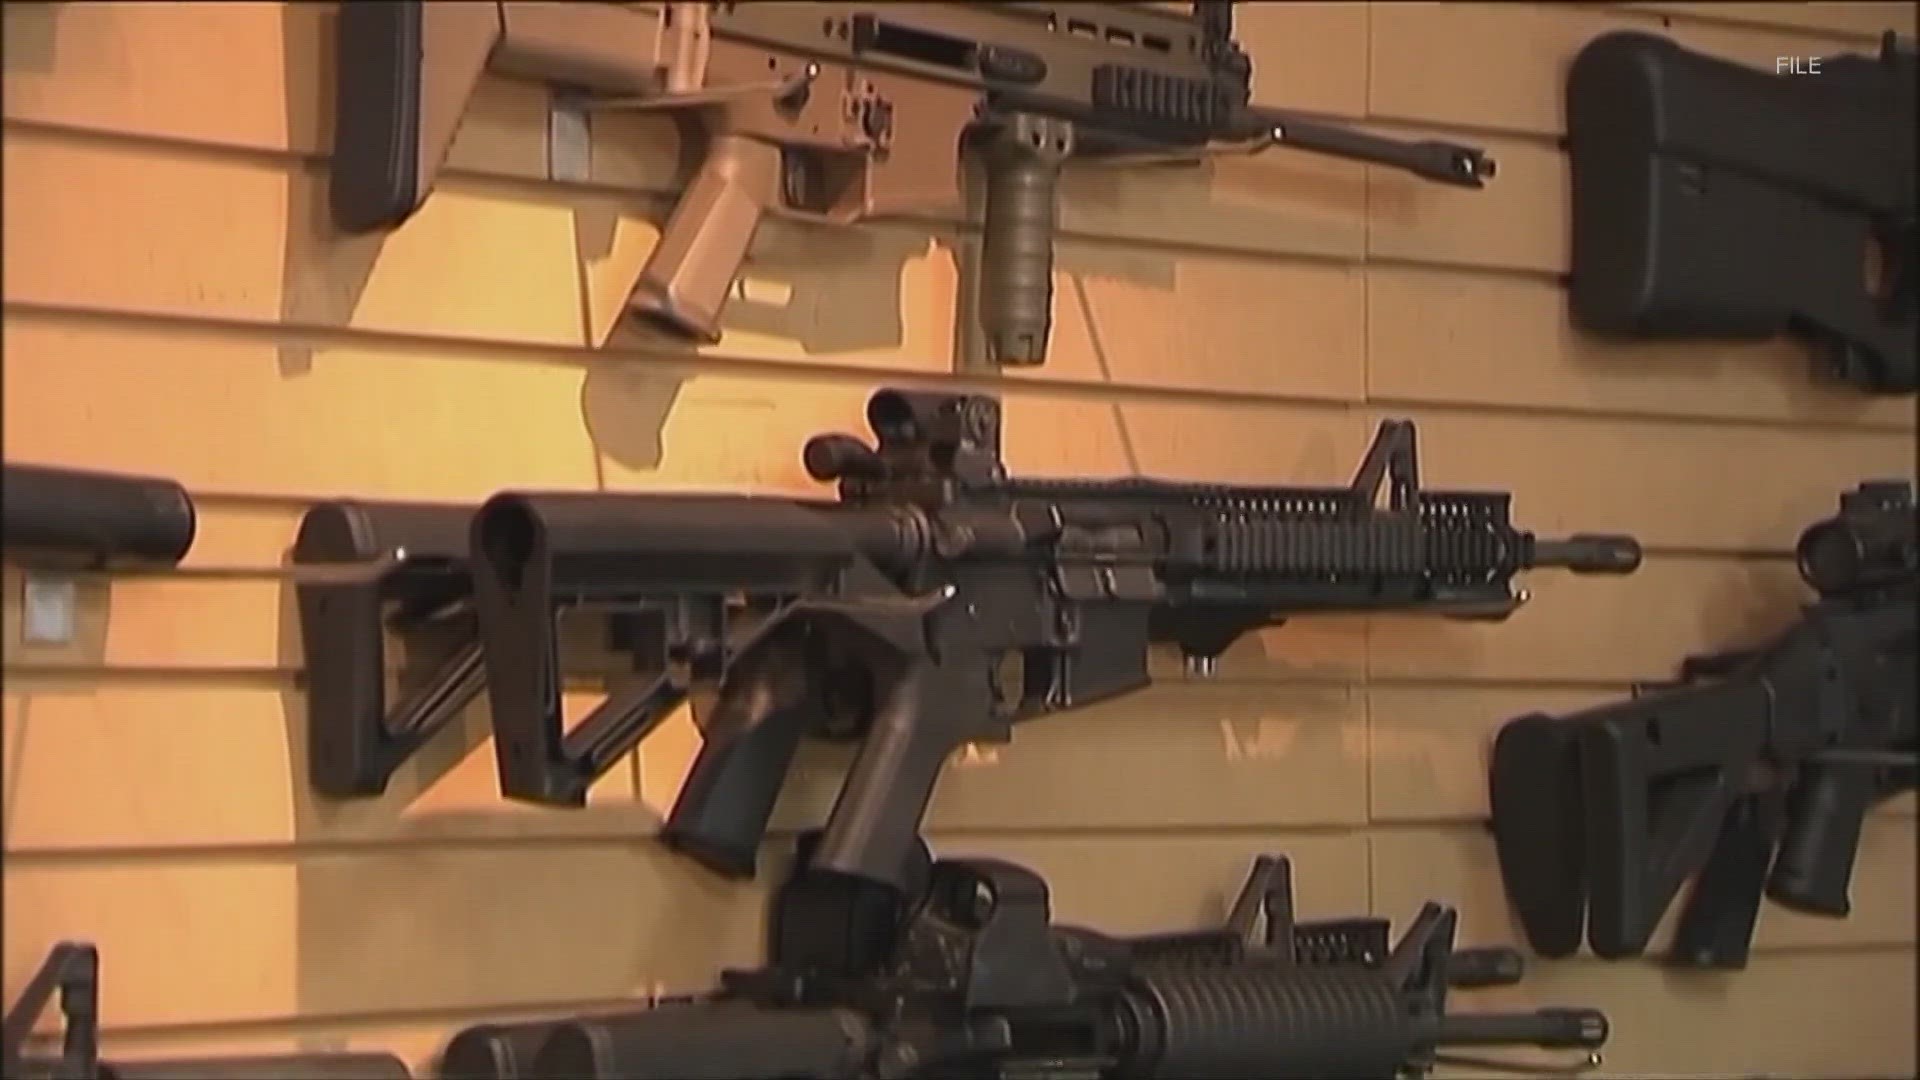 Washington state has now banned selling assault weapons Committee to